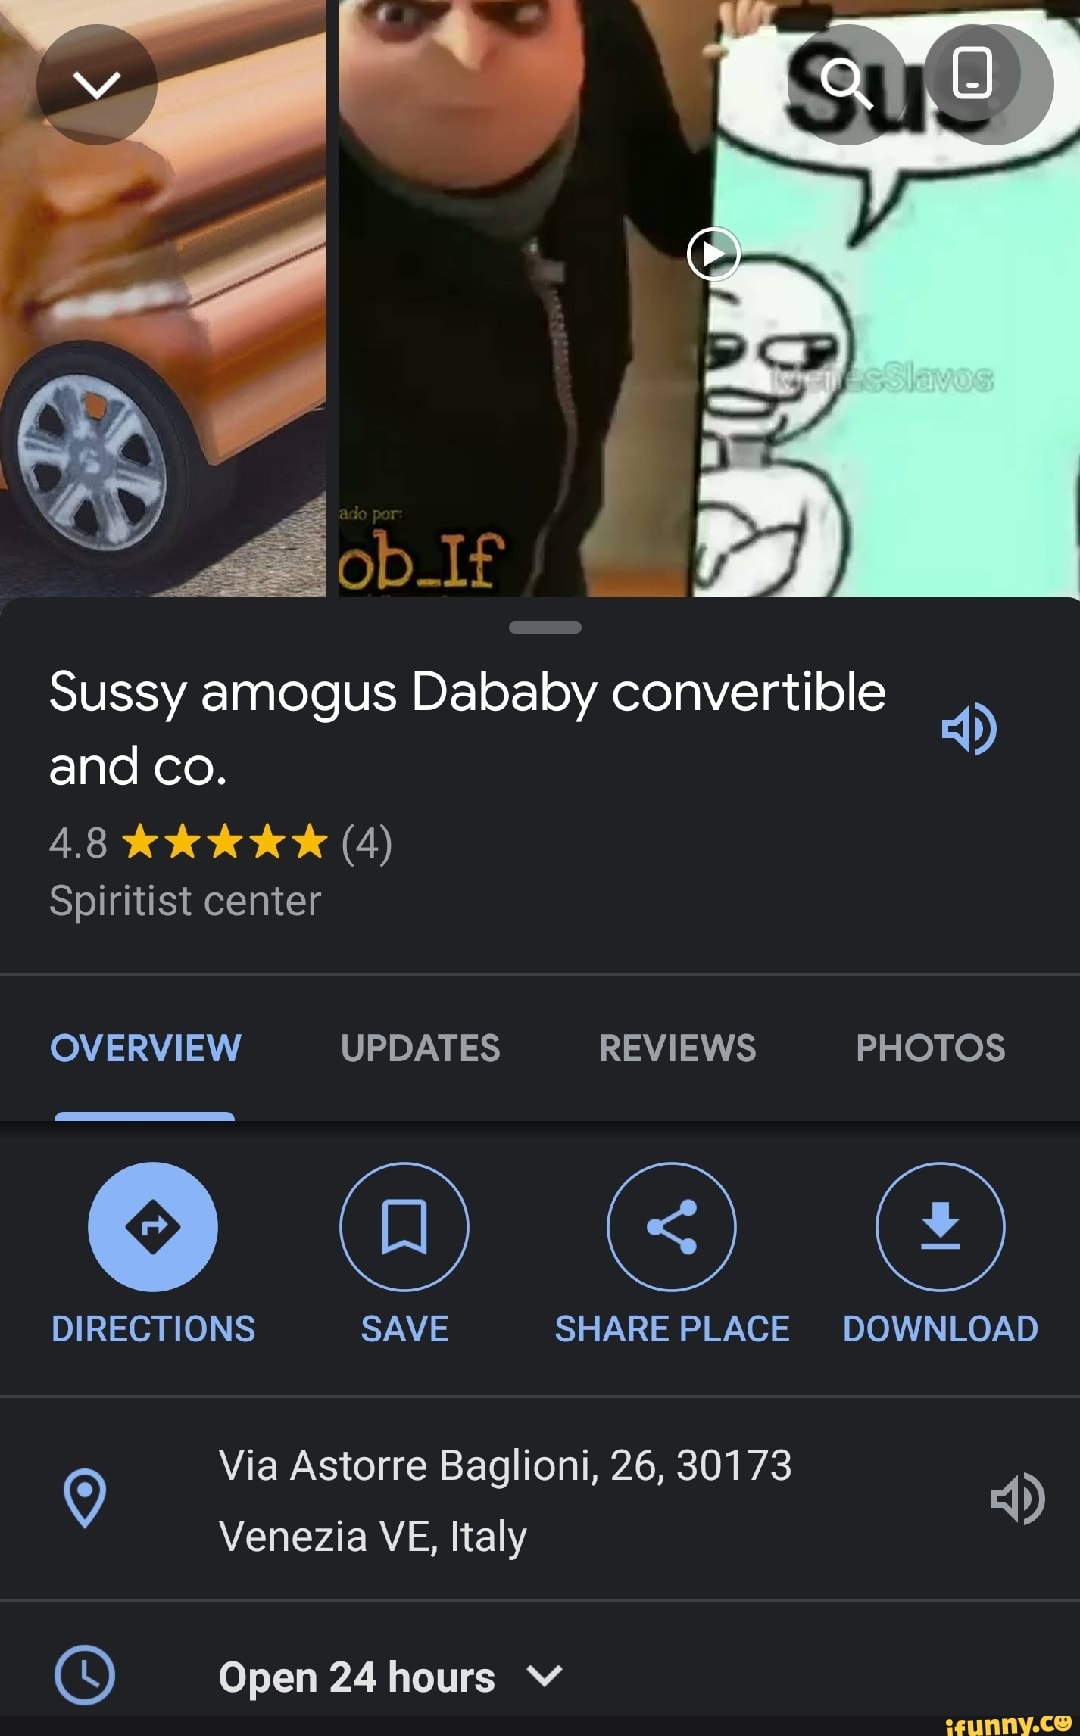 9 @ 56 ll 97% dababy sussy amogus x oF More filters Swacden Tl